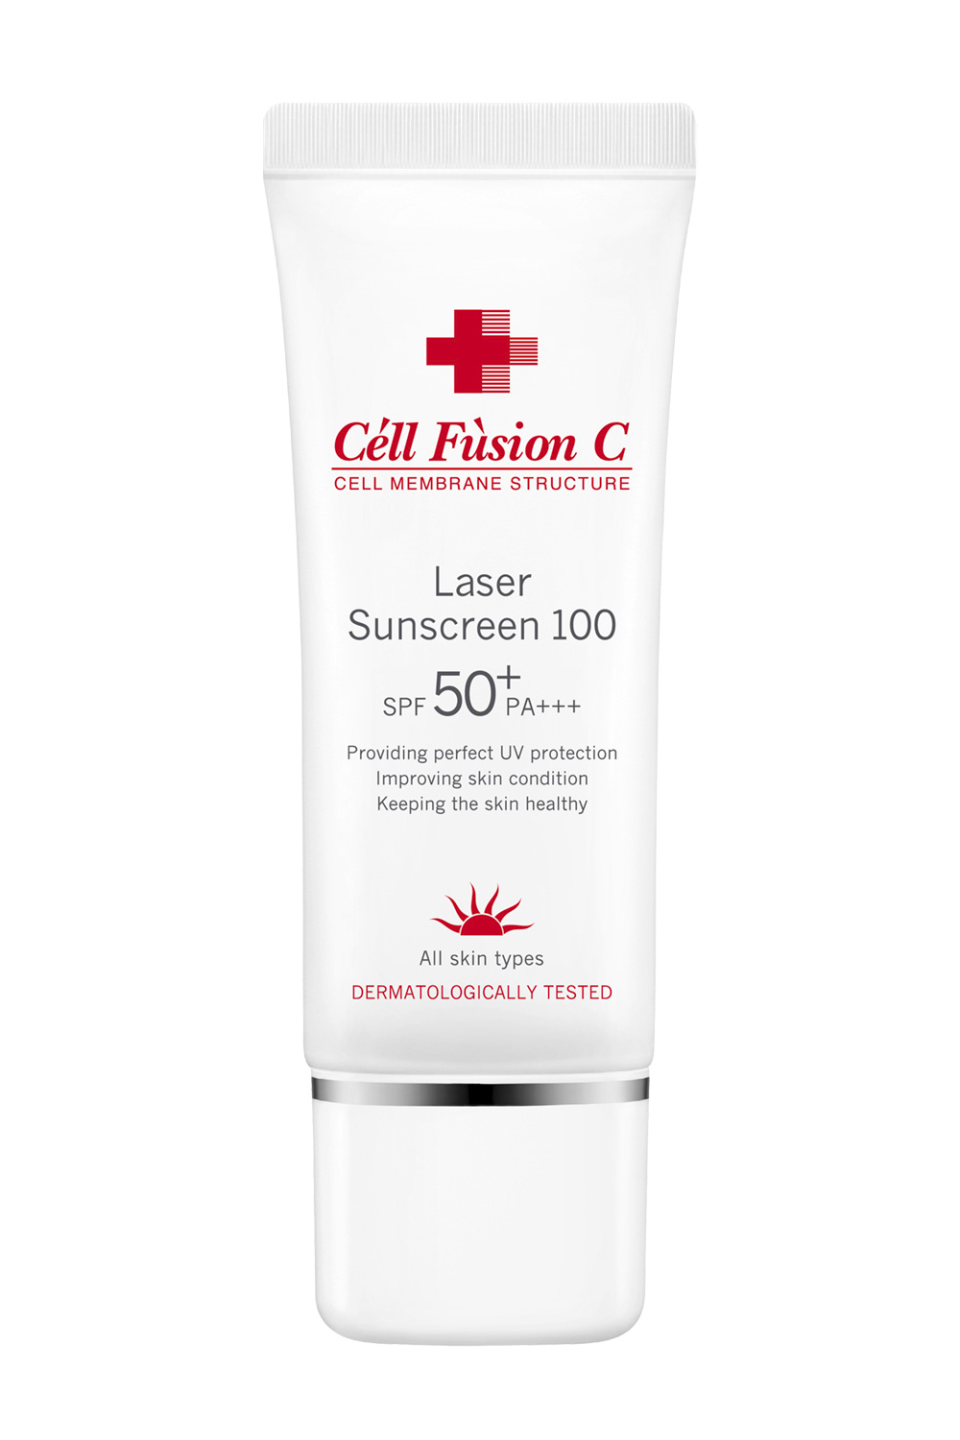 11) Cell Fusion C Laser Sunscreen 100 SPF 50+